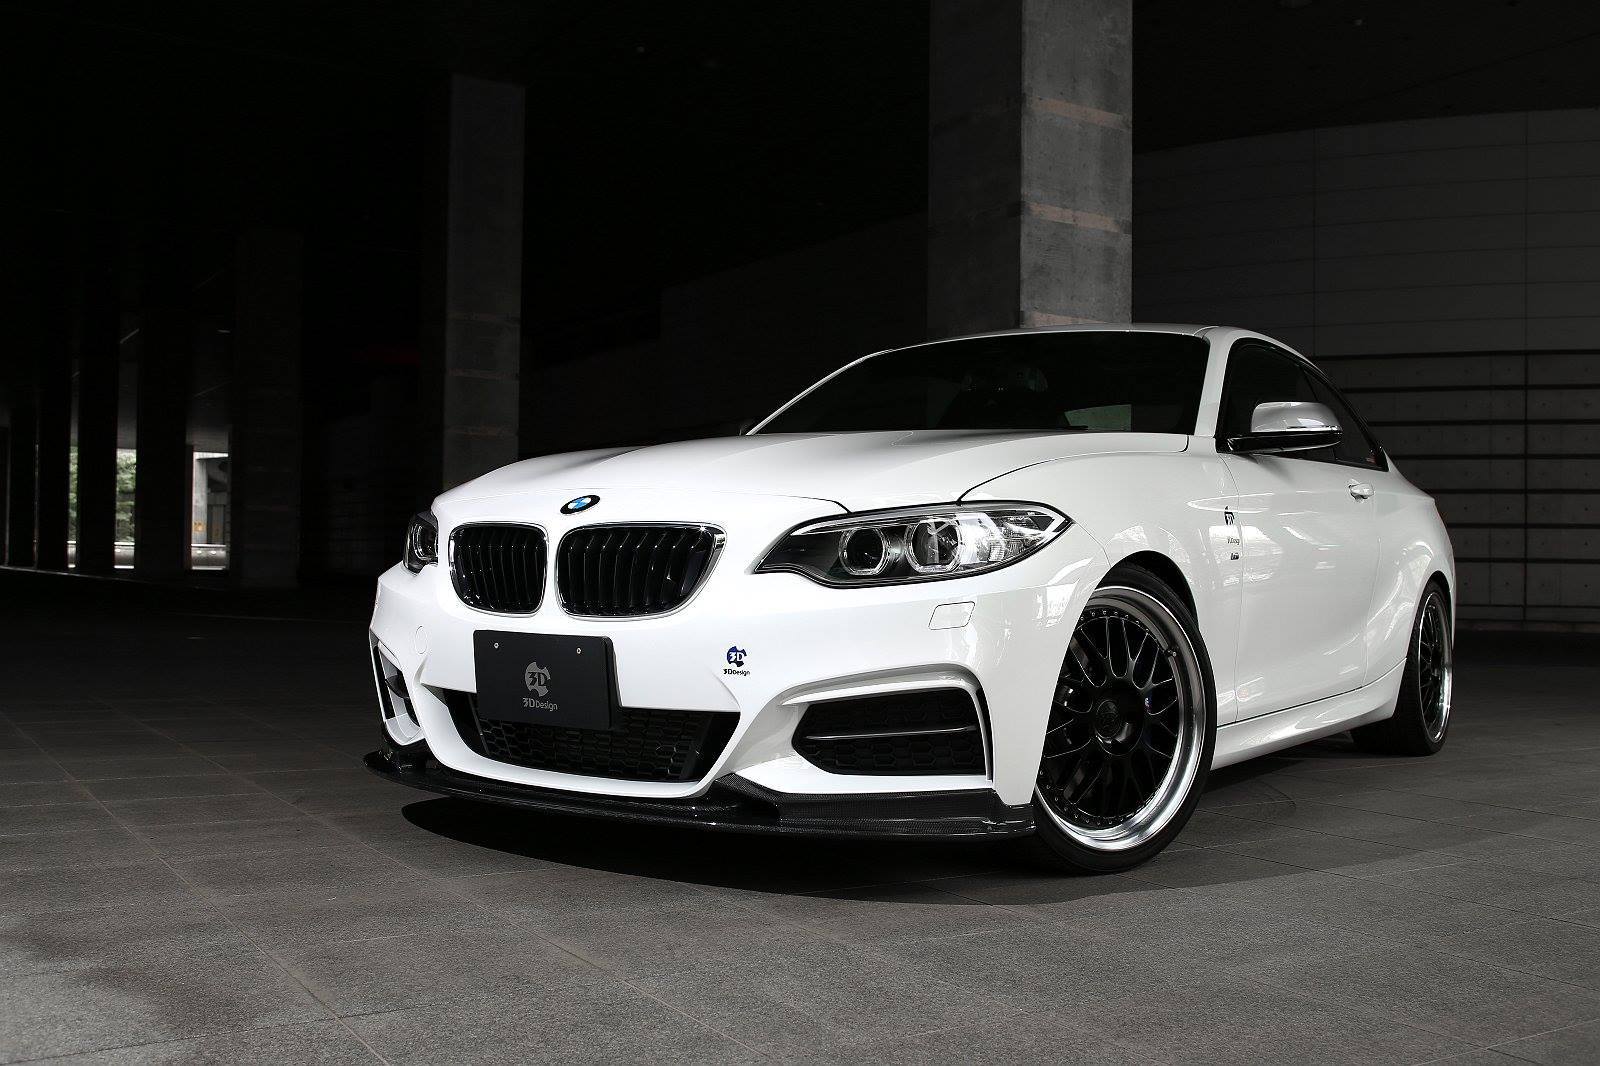 Free Download Bmw M235i Hd Wallpaper 1600x1066 For Your Desktop